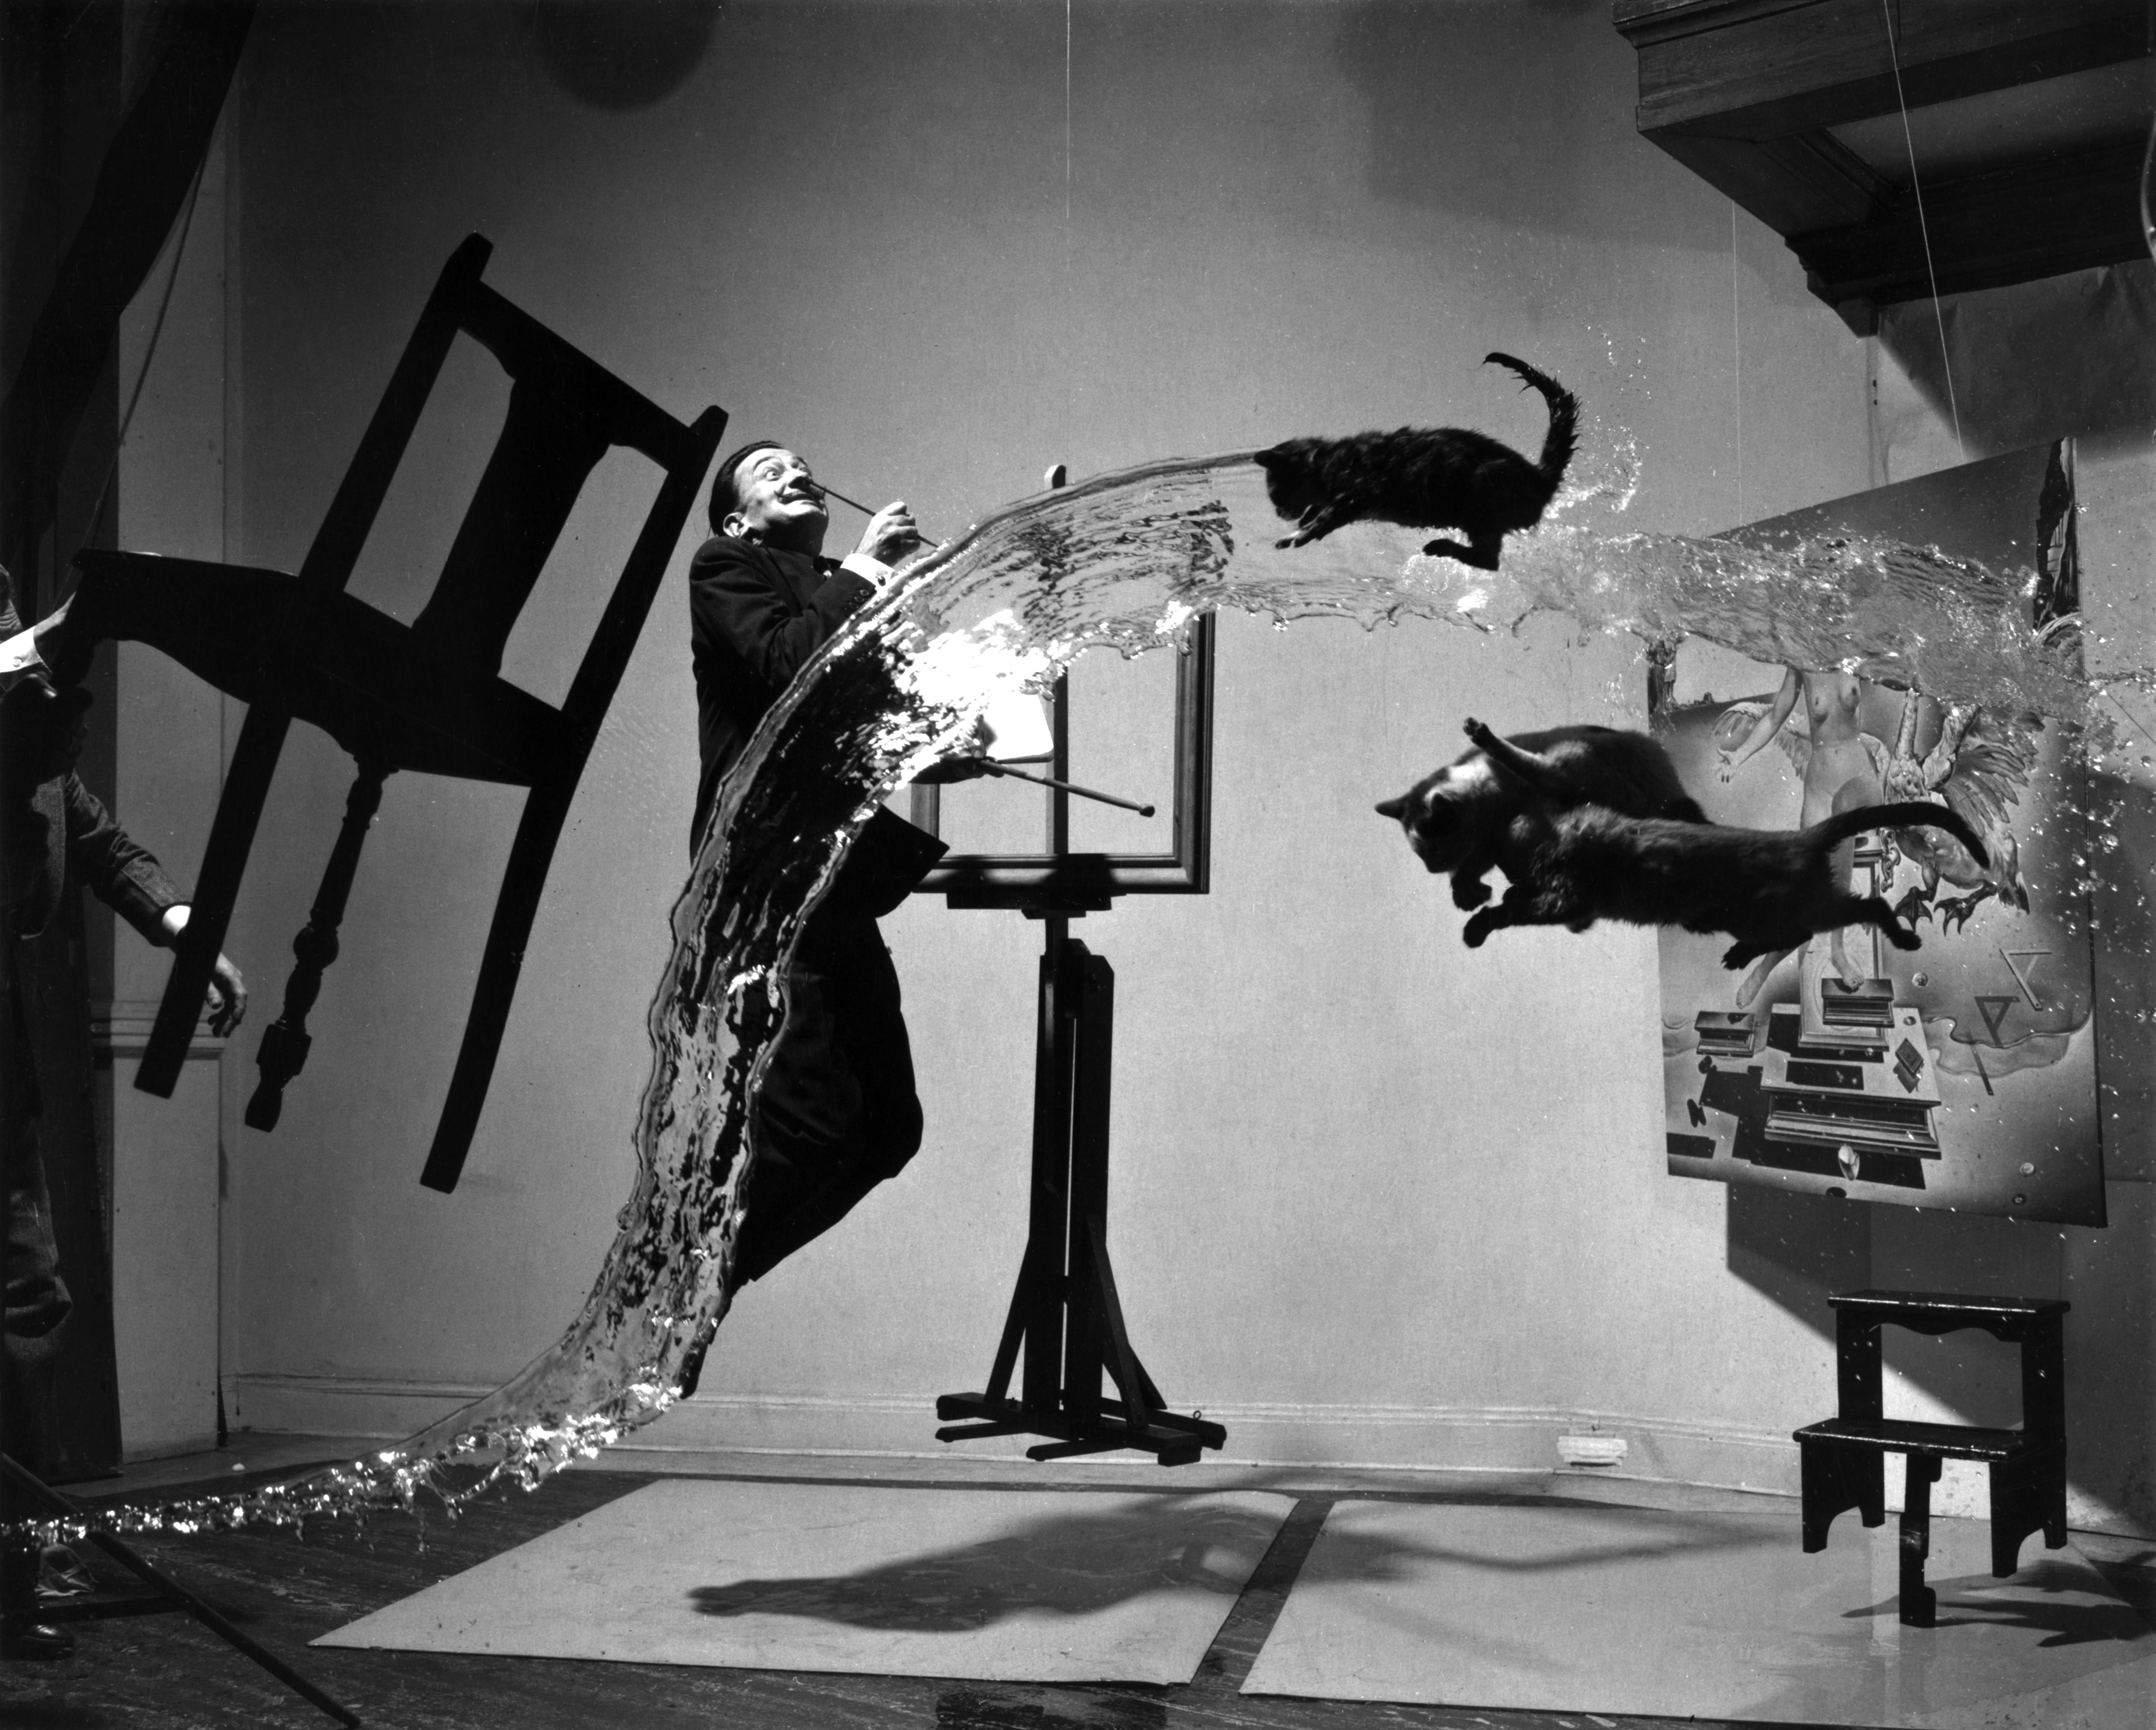 Dali Atomicus by Philippe Halsman - 1948 - - Library of Congress